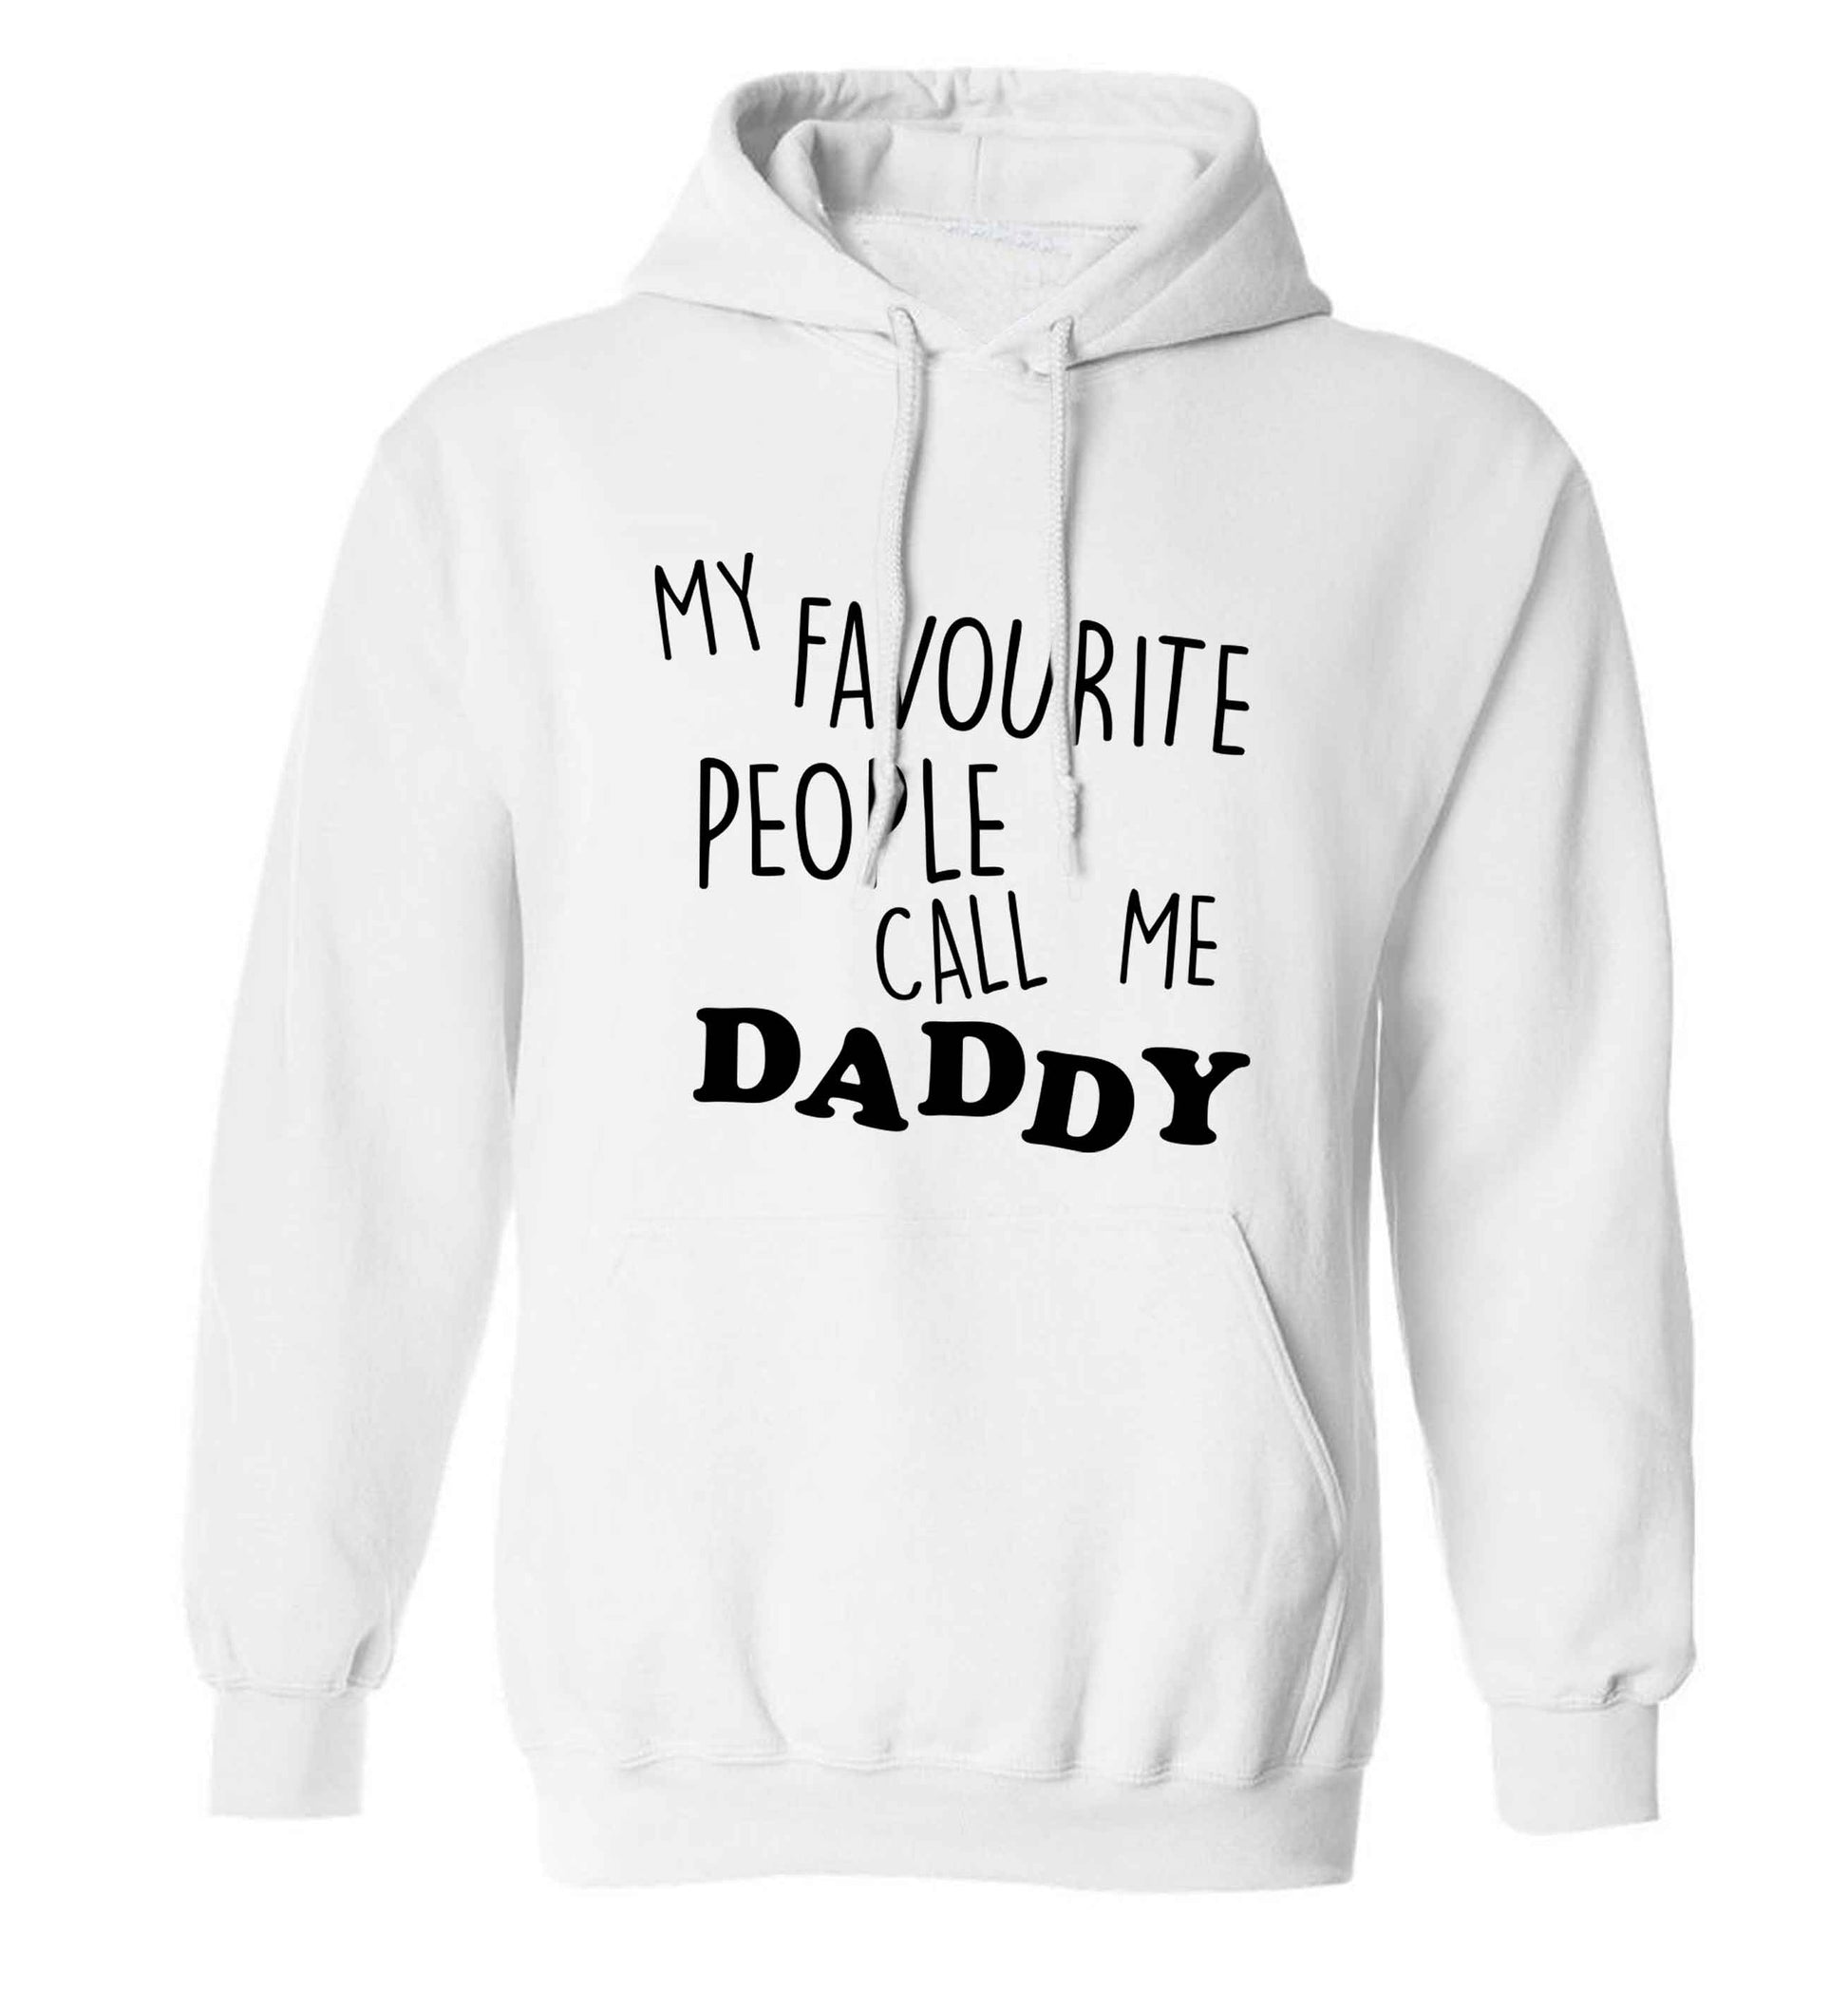 My favourite people call me daddy adults unisex white hoodie 2XL